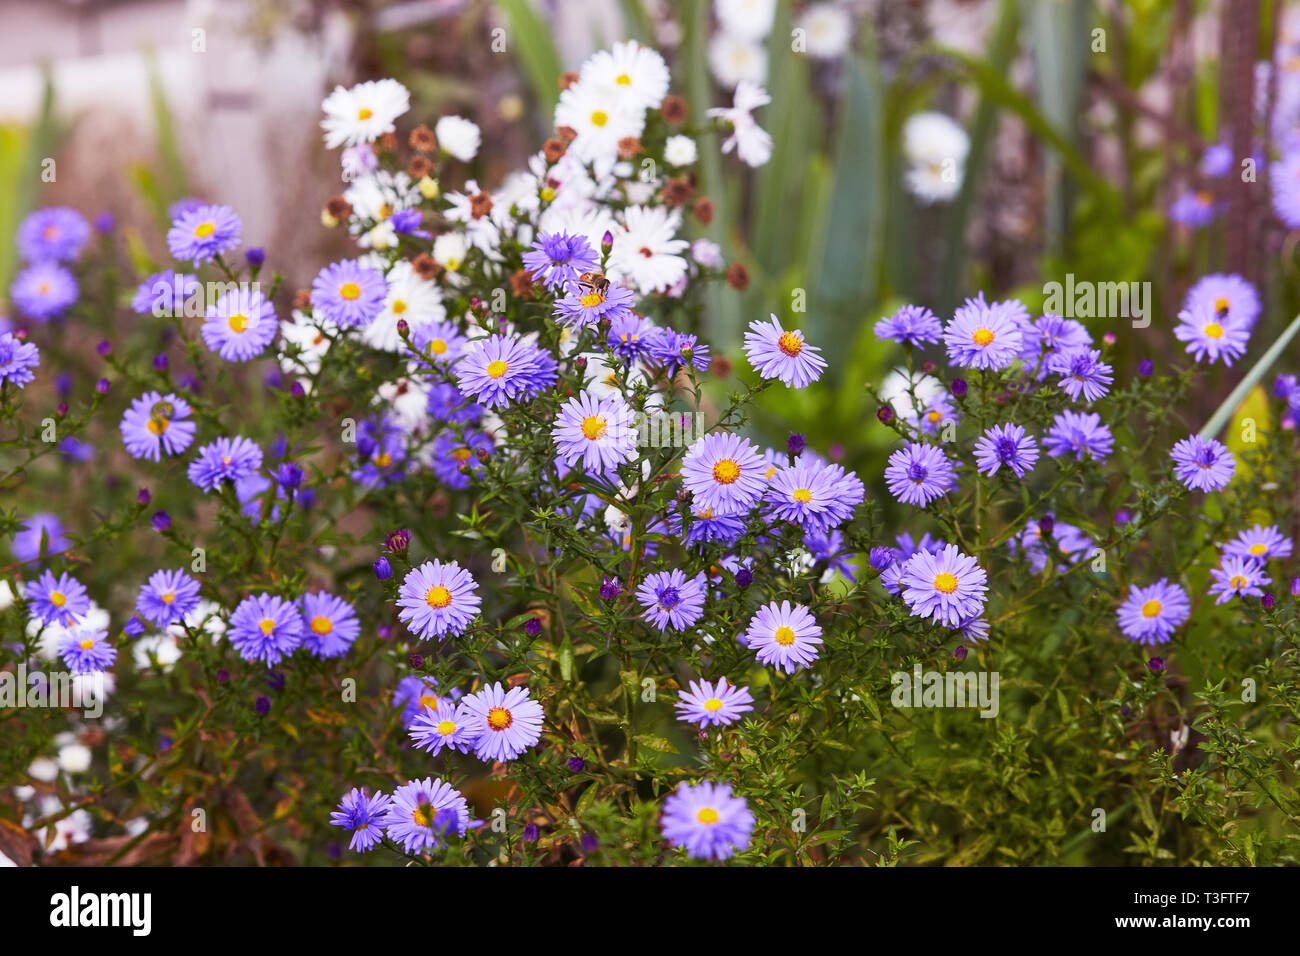 Chrysanthemum flowers as a background close up. Blue and violet small Chrysanthemums. Chrysanthemum wallpaper. Floral background. Selective focus. Stock Photo